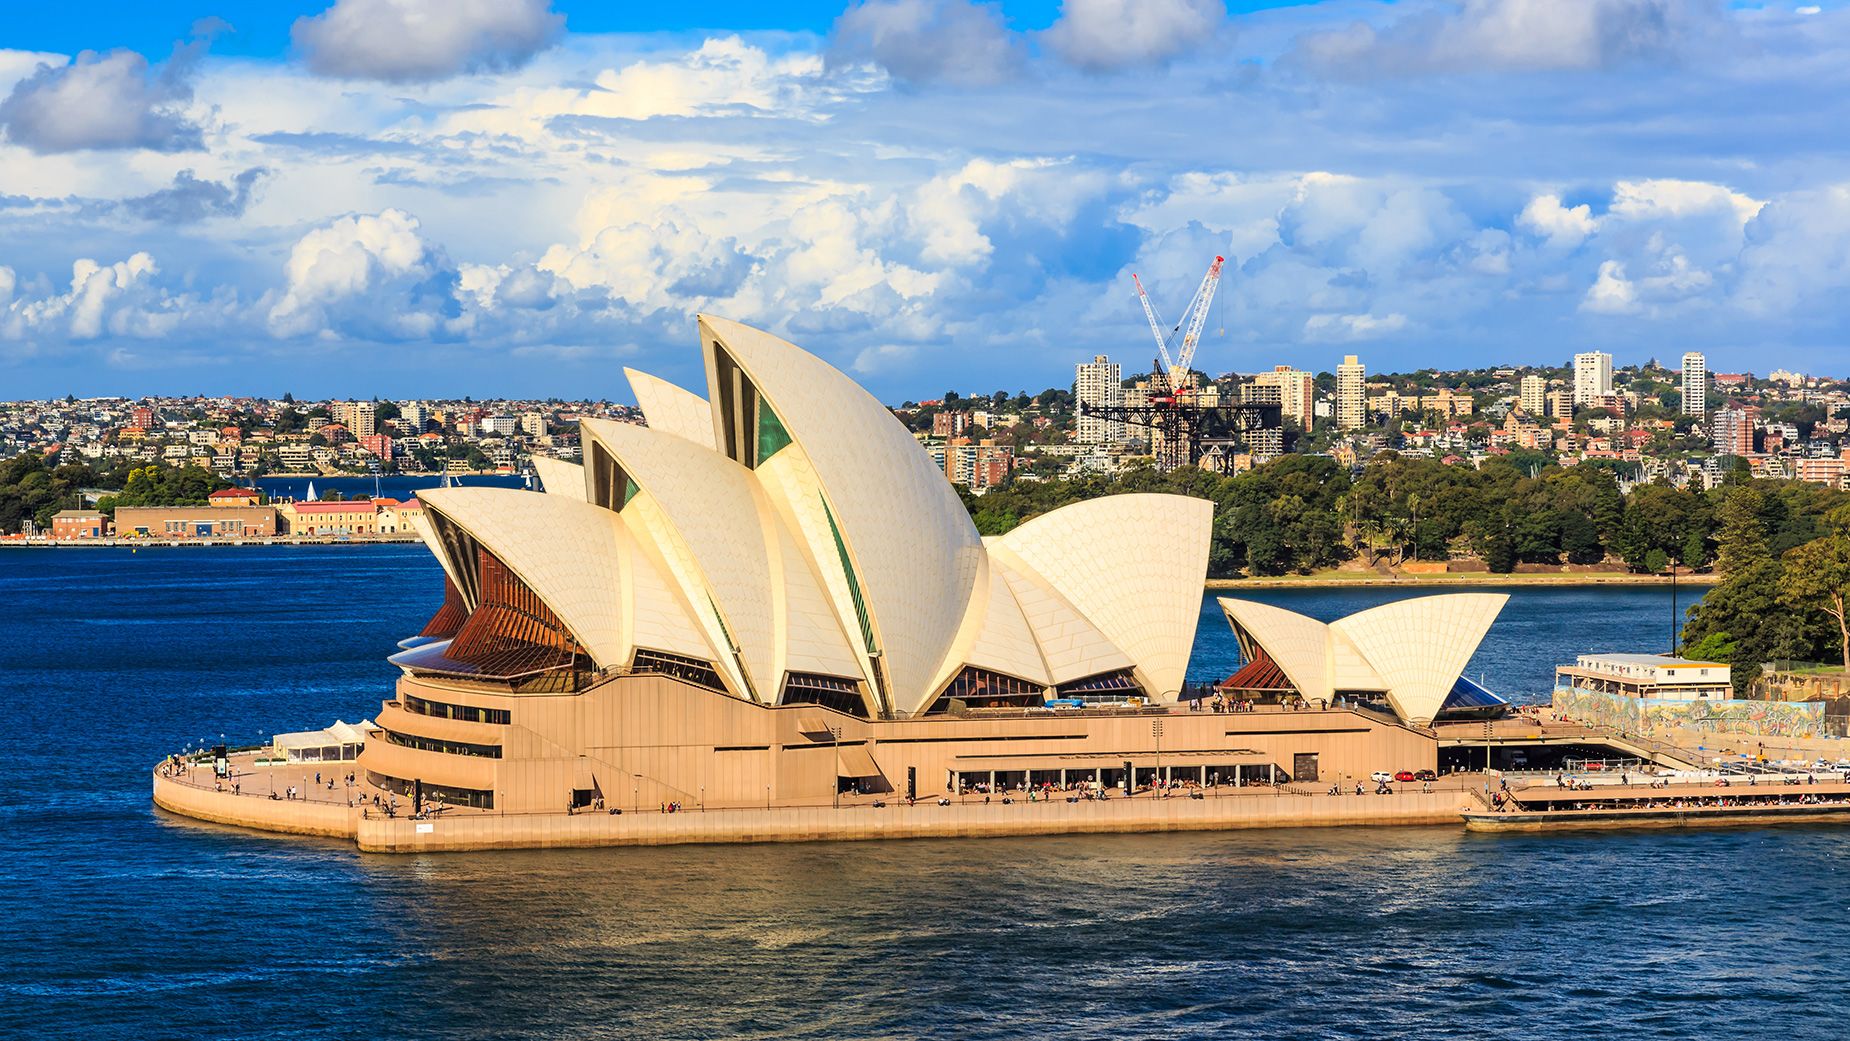 Jørn Utzon's winning design has become one of the world's most recognizable buildings.